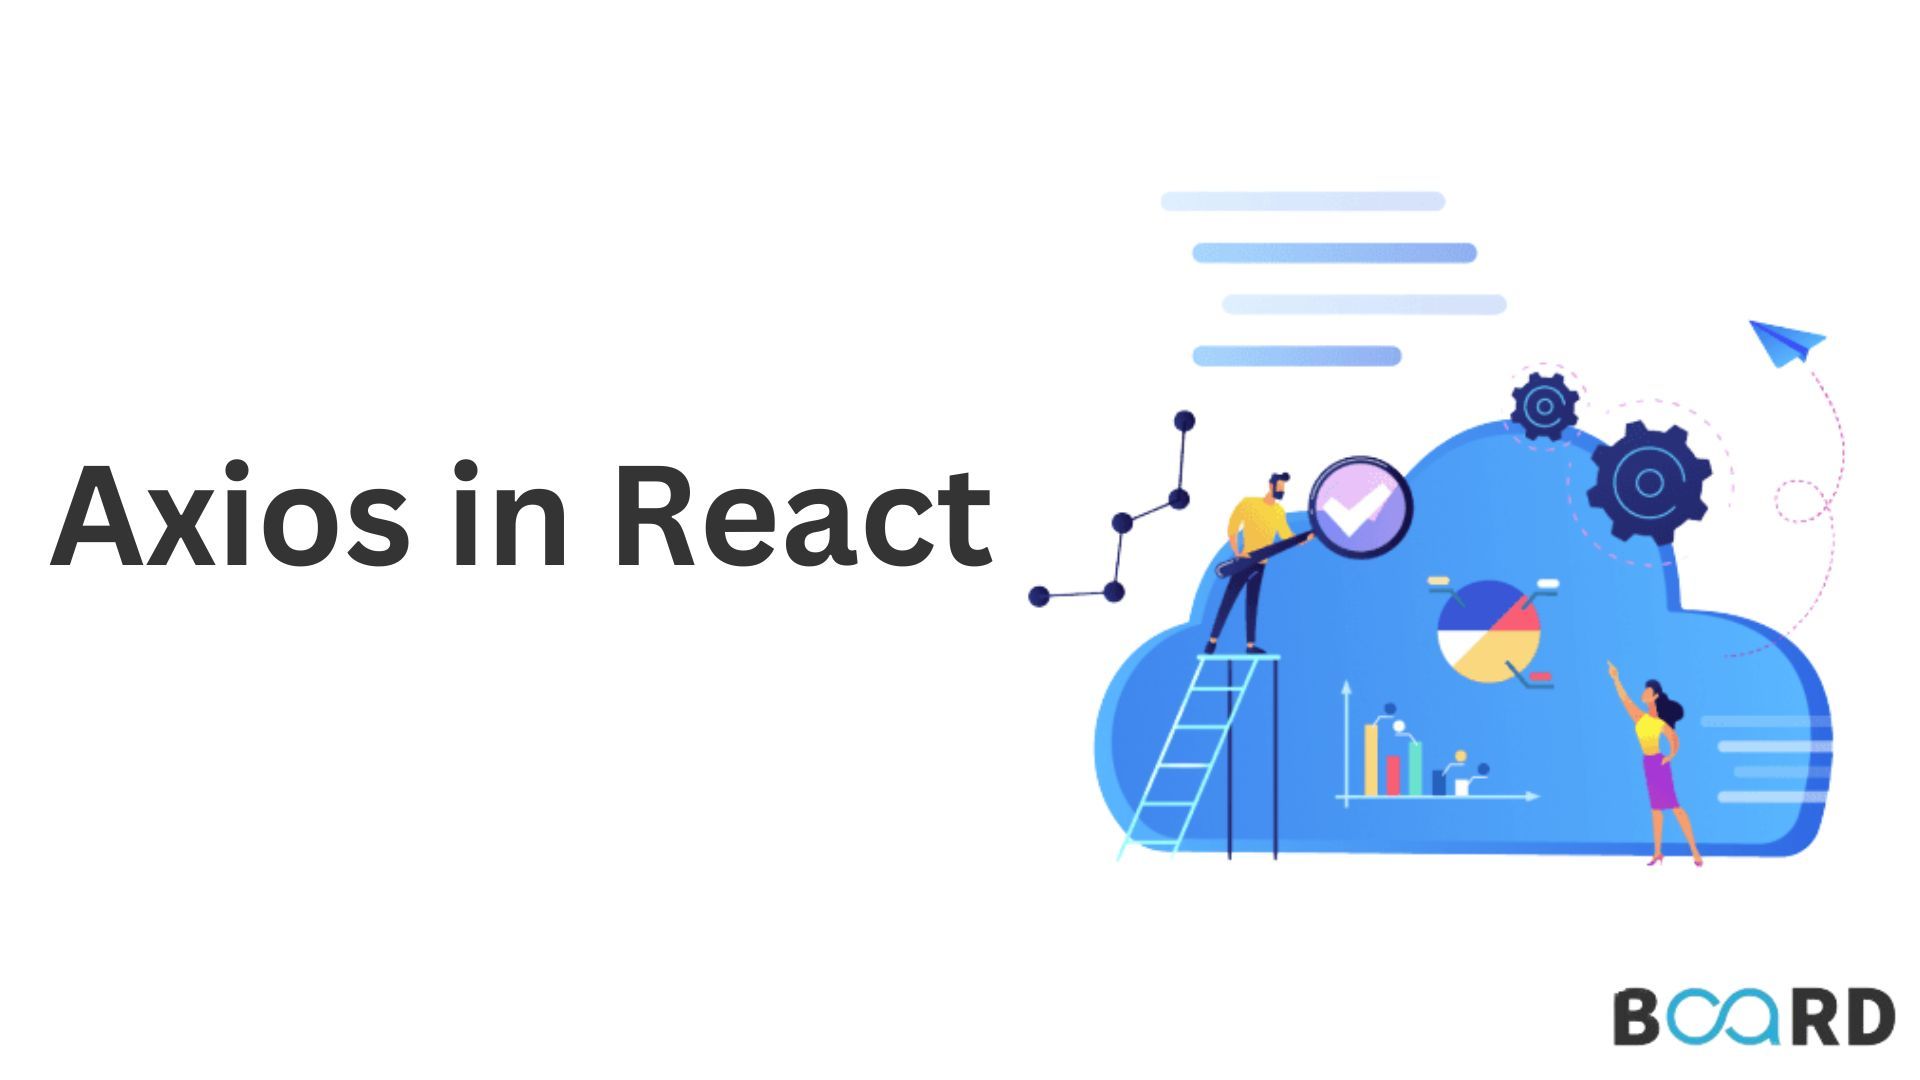 Working of Axios in React